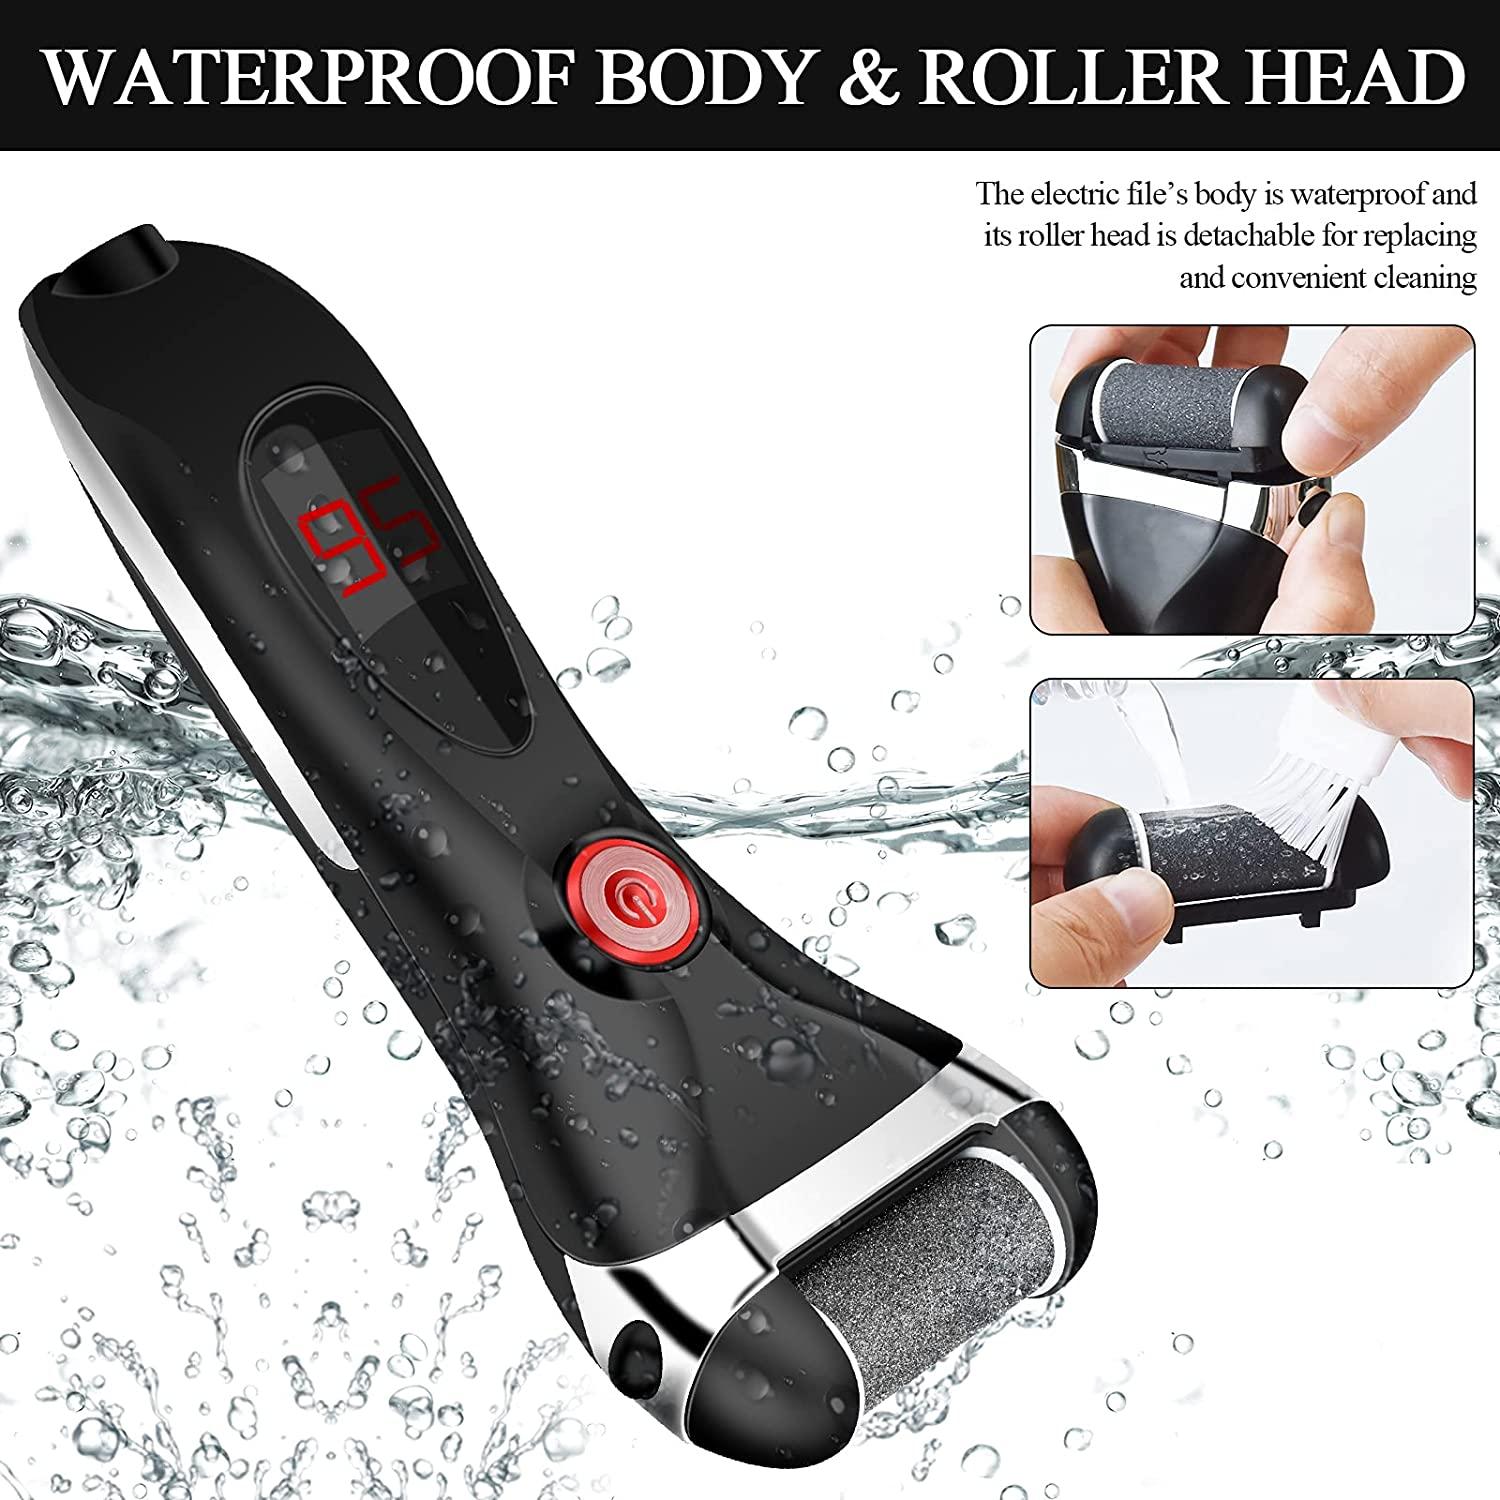 Foot Scrubber Callus Remover Foot Bath Massager Feet Cleaner Brush Remove  Dead Skin Massage Body Bathroom Tool Feet Care - Foot Care Tool - AliExpress